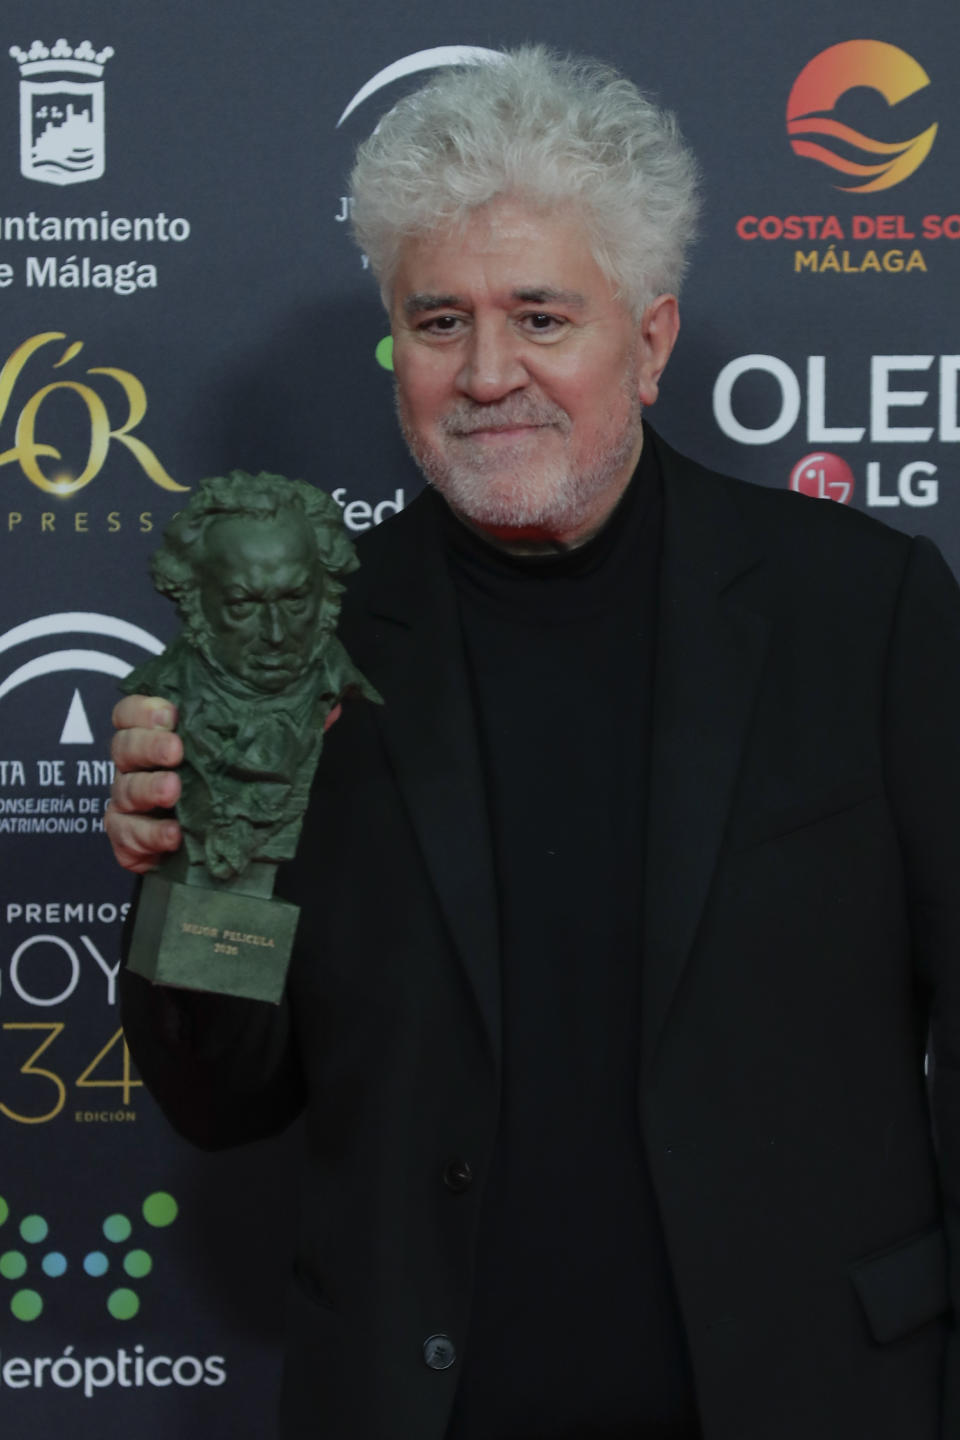 Spanish film director Pedro Almodovar poses with his trophy after winning the best film award for "Dolor y gloria" during the Goya Film Awards Ceremony in Malaga, southern Spain, early Sunday, Jan. 26, 2020. The annual Goya Awards are Spain's main national film awards. (AP Photo/Manu Fernandez)